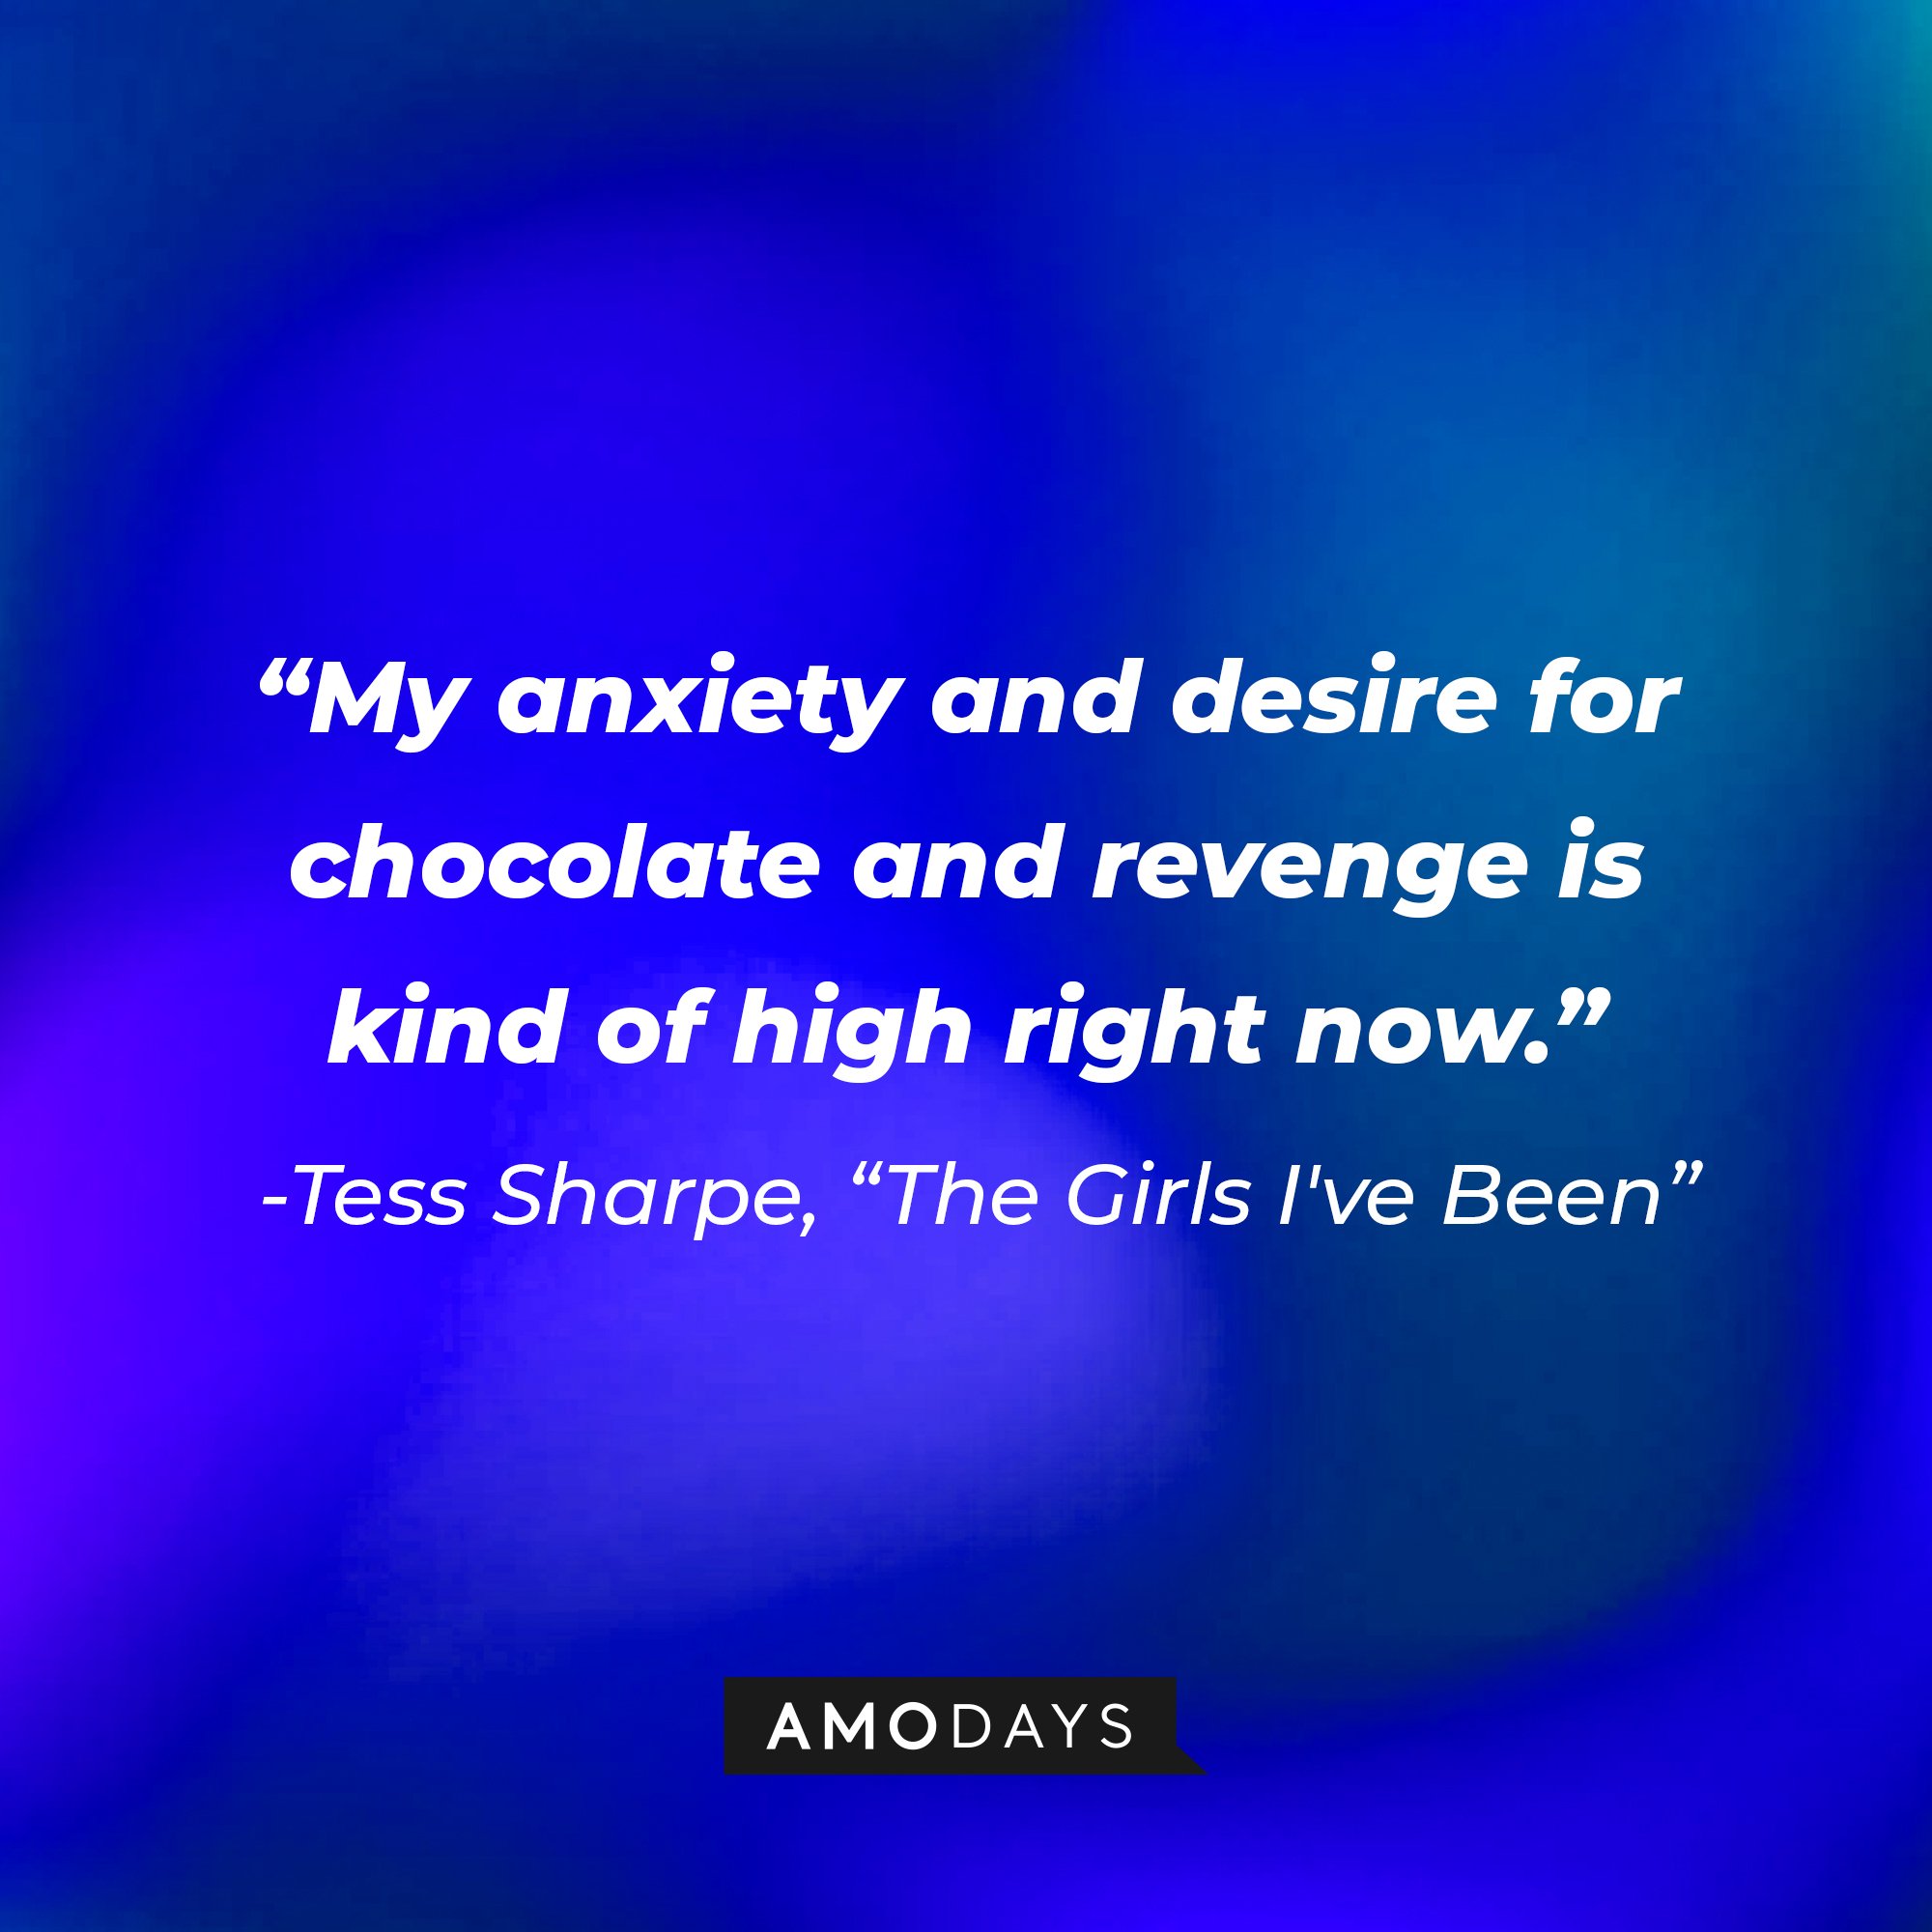 Tess Sharpe’s quote from "The Girls I've Been": "My anxiety and desire for chocolate and revenge is kind of high right now." | Image: AmoDays